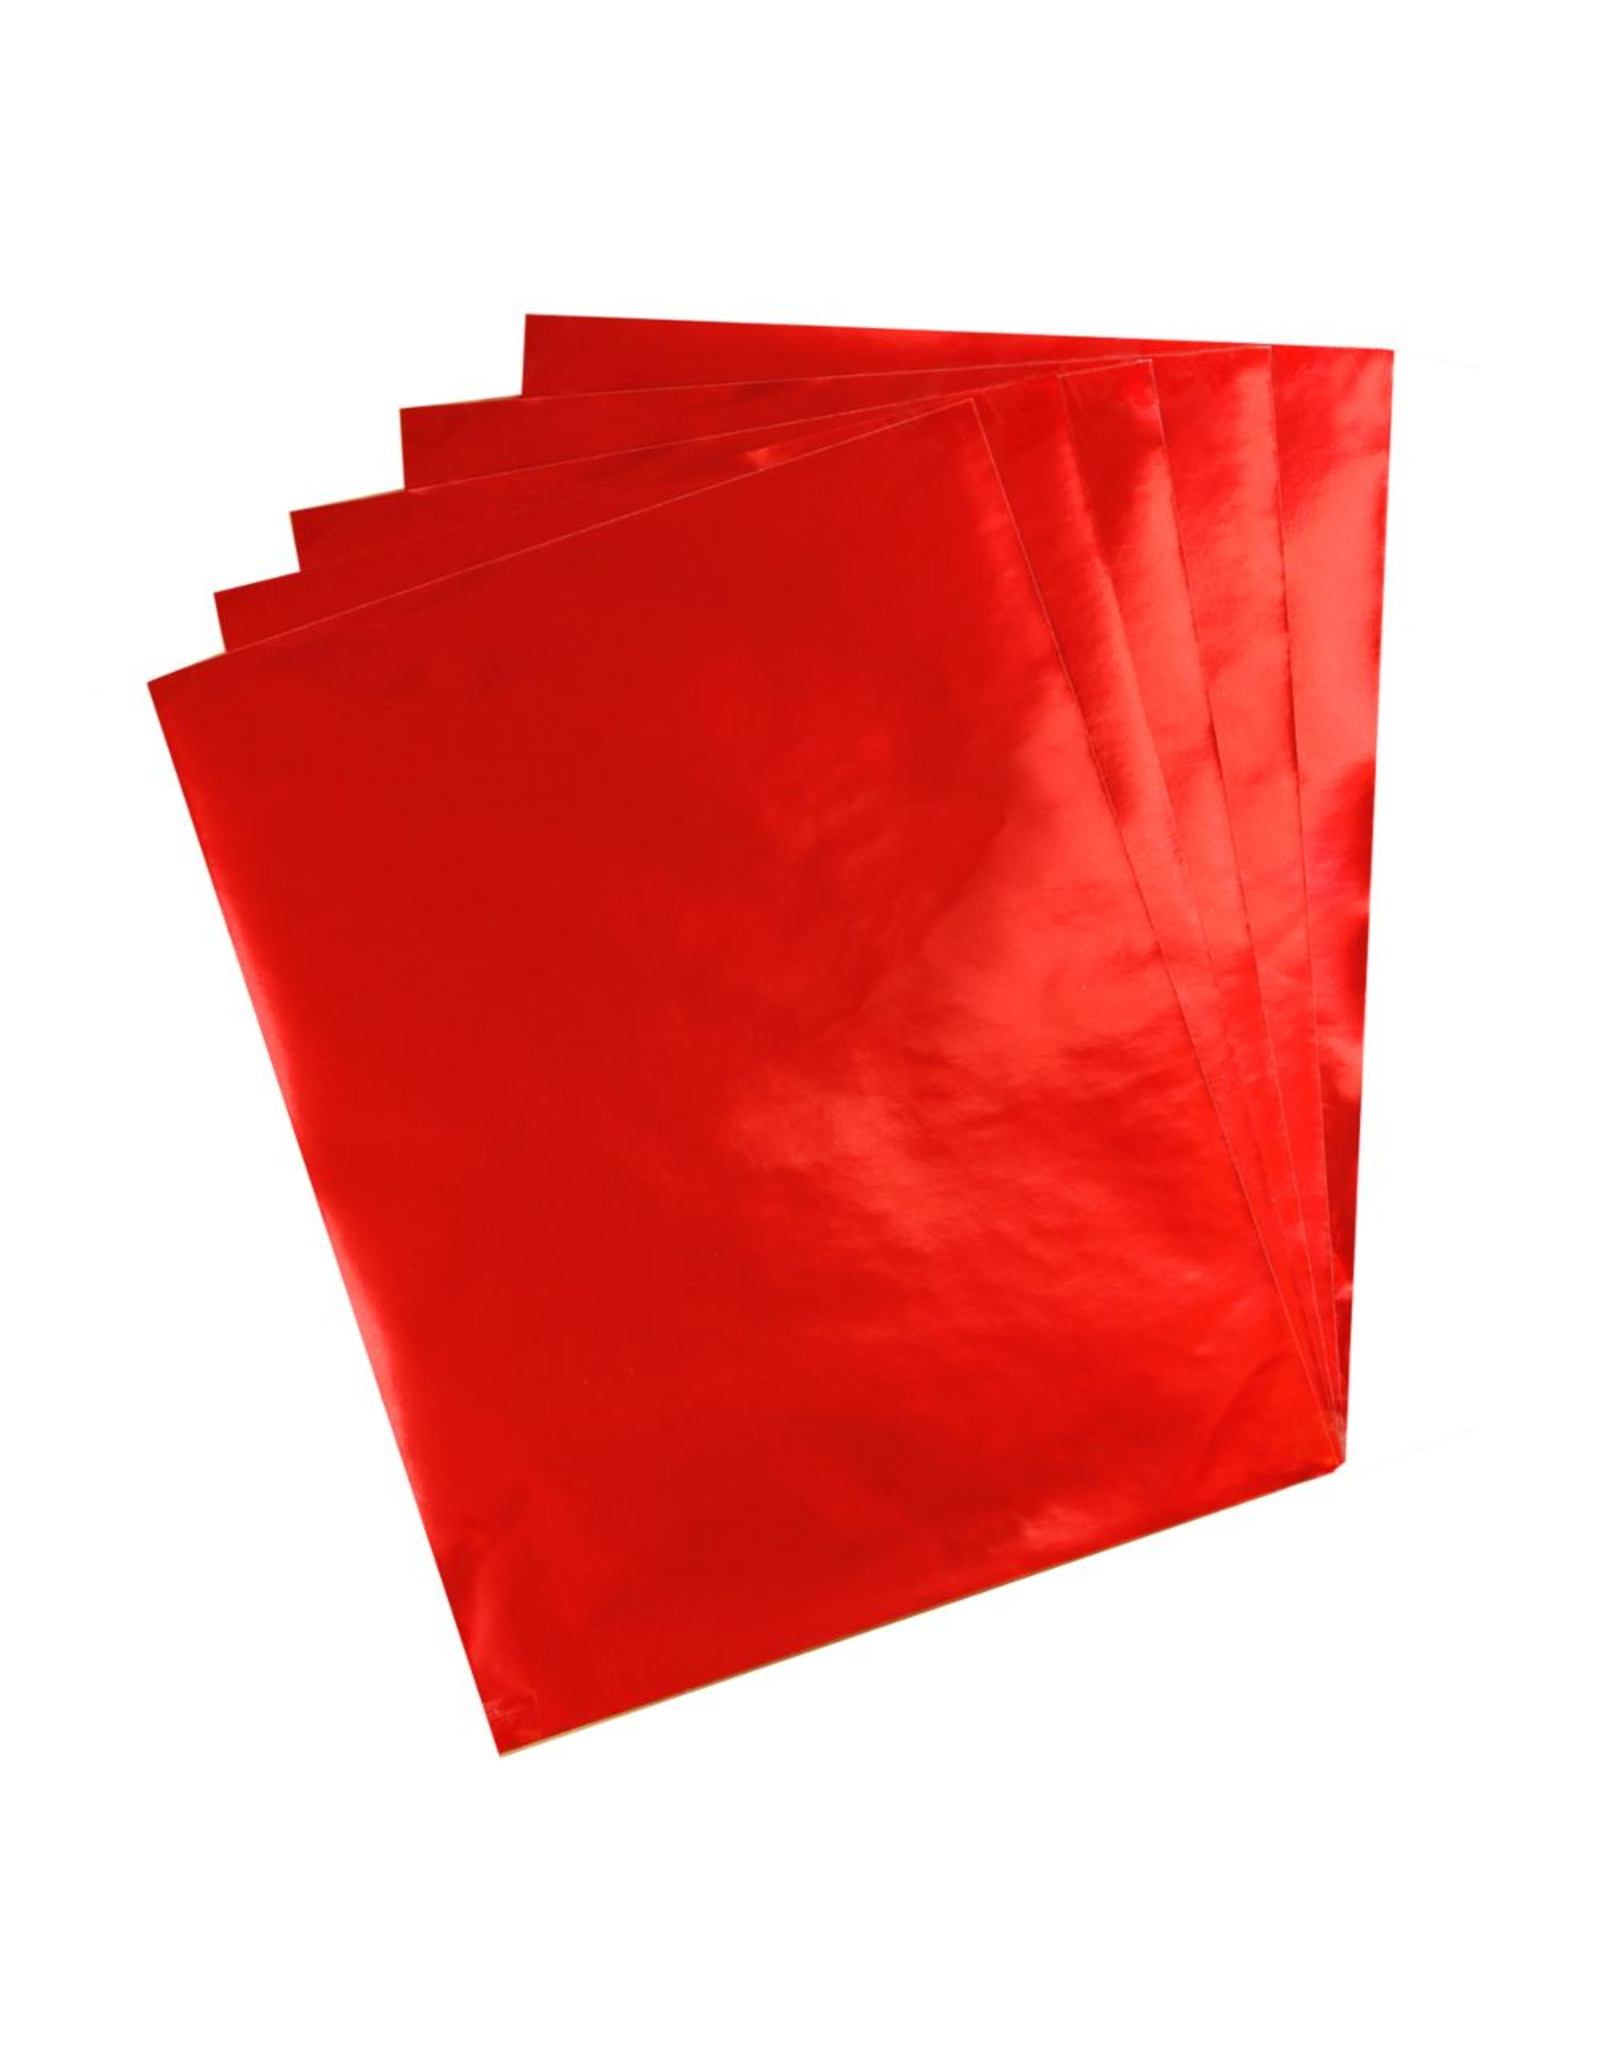 HYGLOSS METALLIC PAPER: 8.5"X11" RED 12sheets